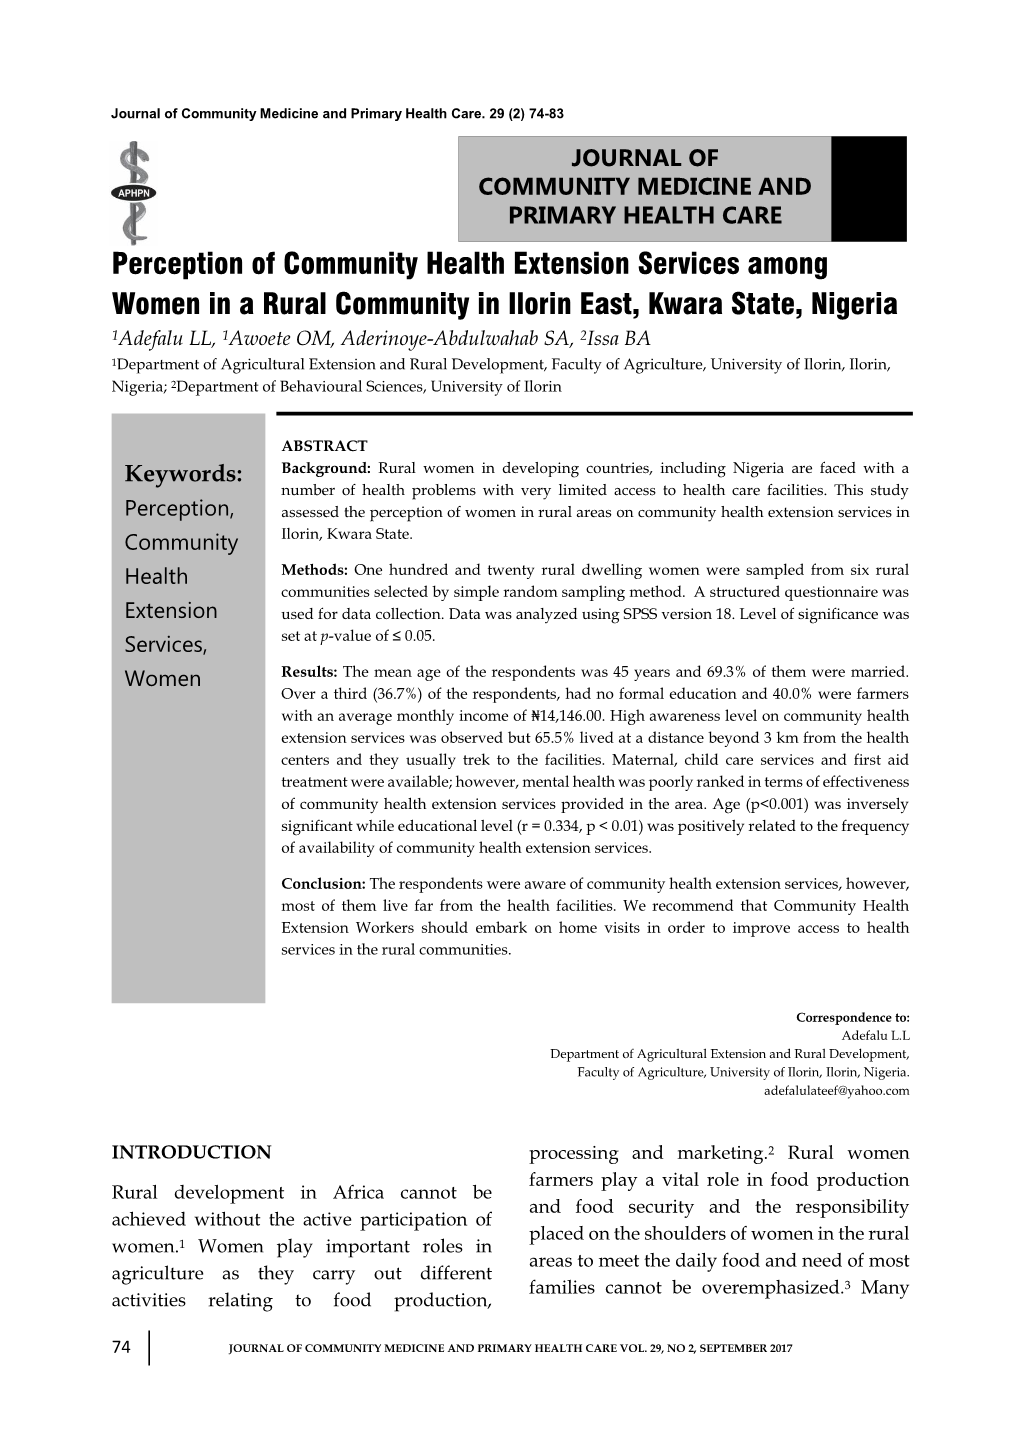 Perception of Community Health Extension Services Among Women